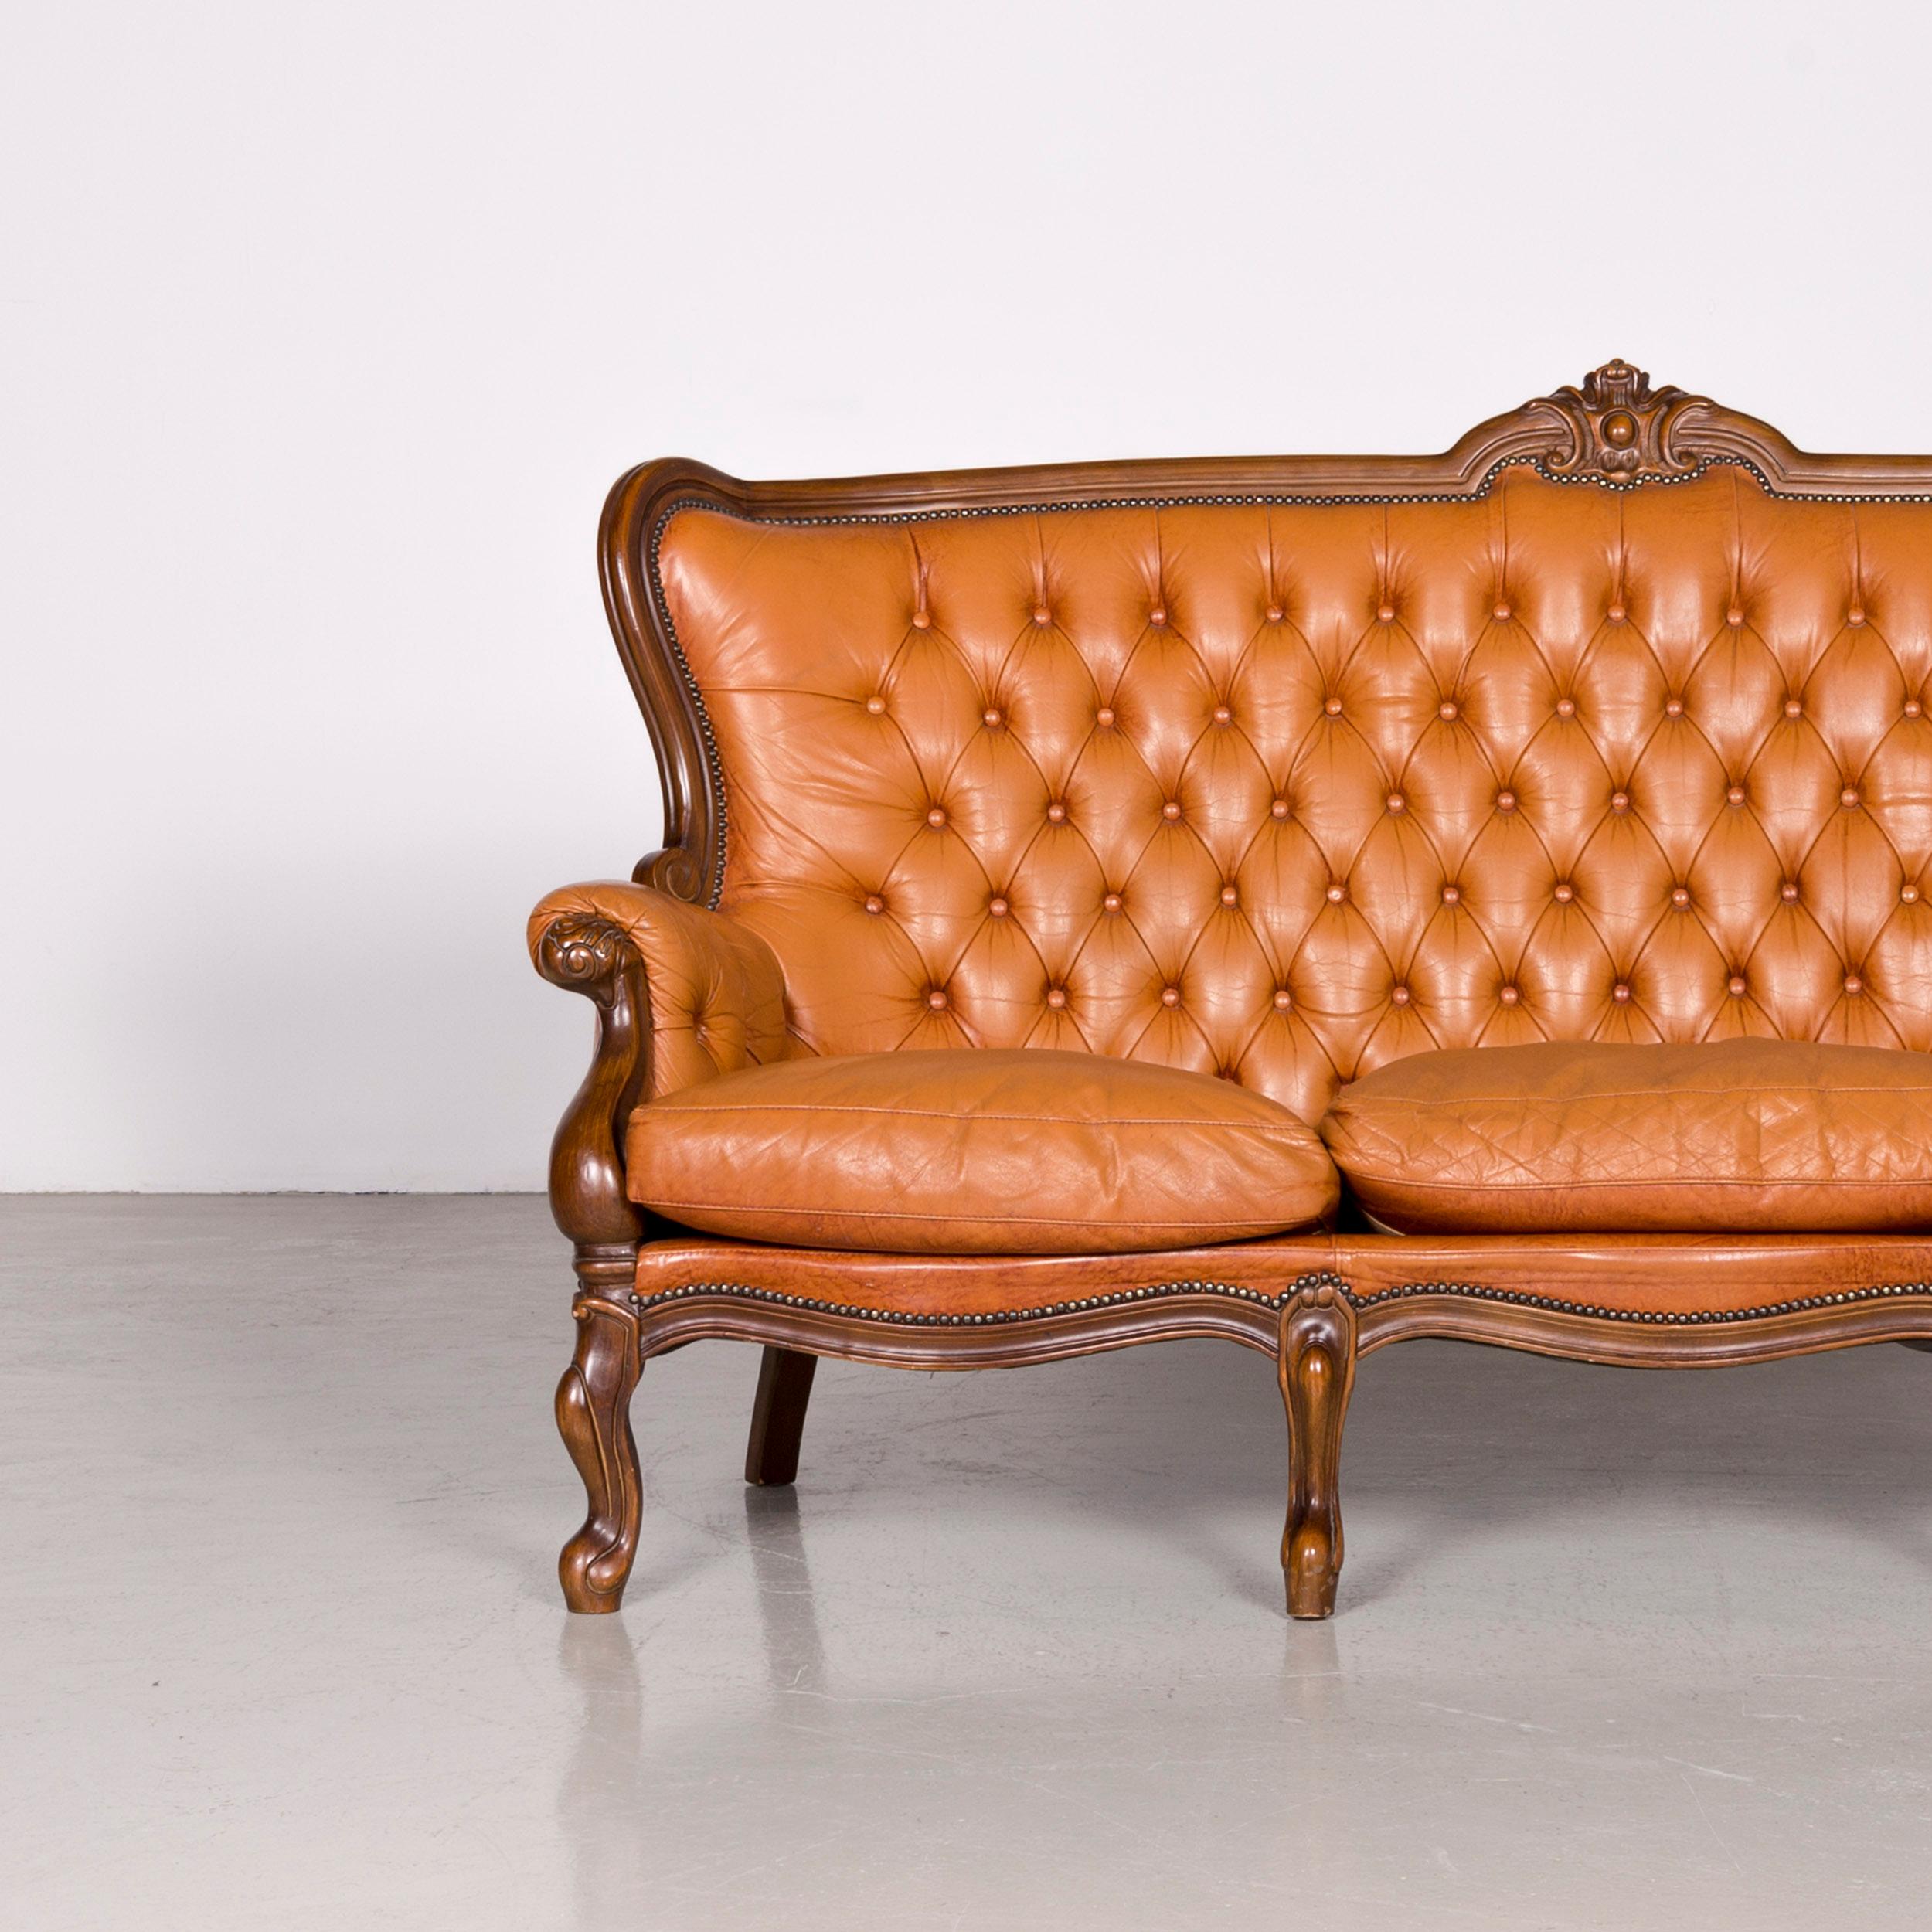 British Chesterfield Leather Sofa Brown Vintage Retro Couch For Sale